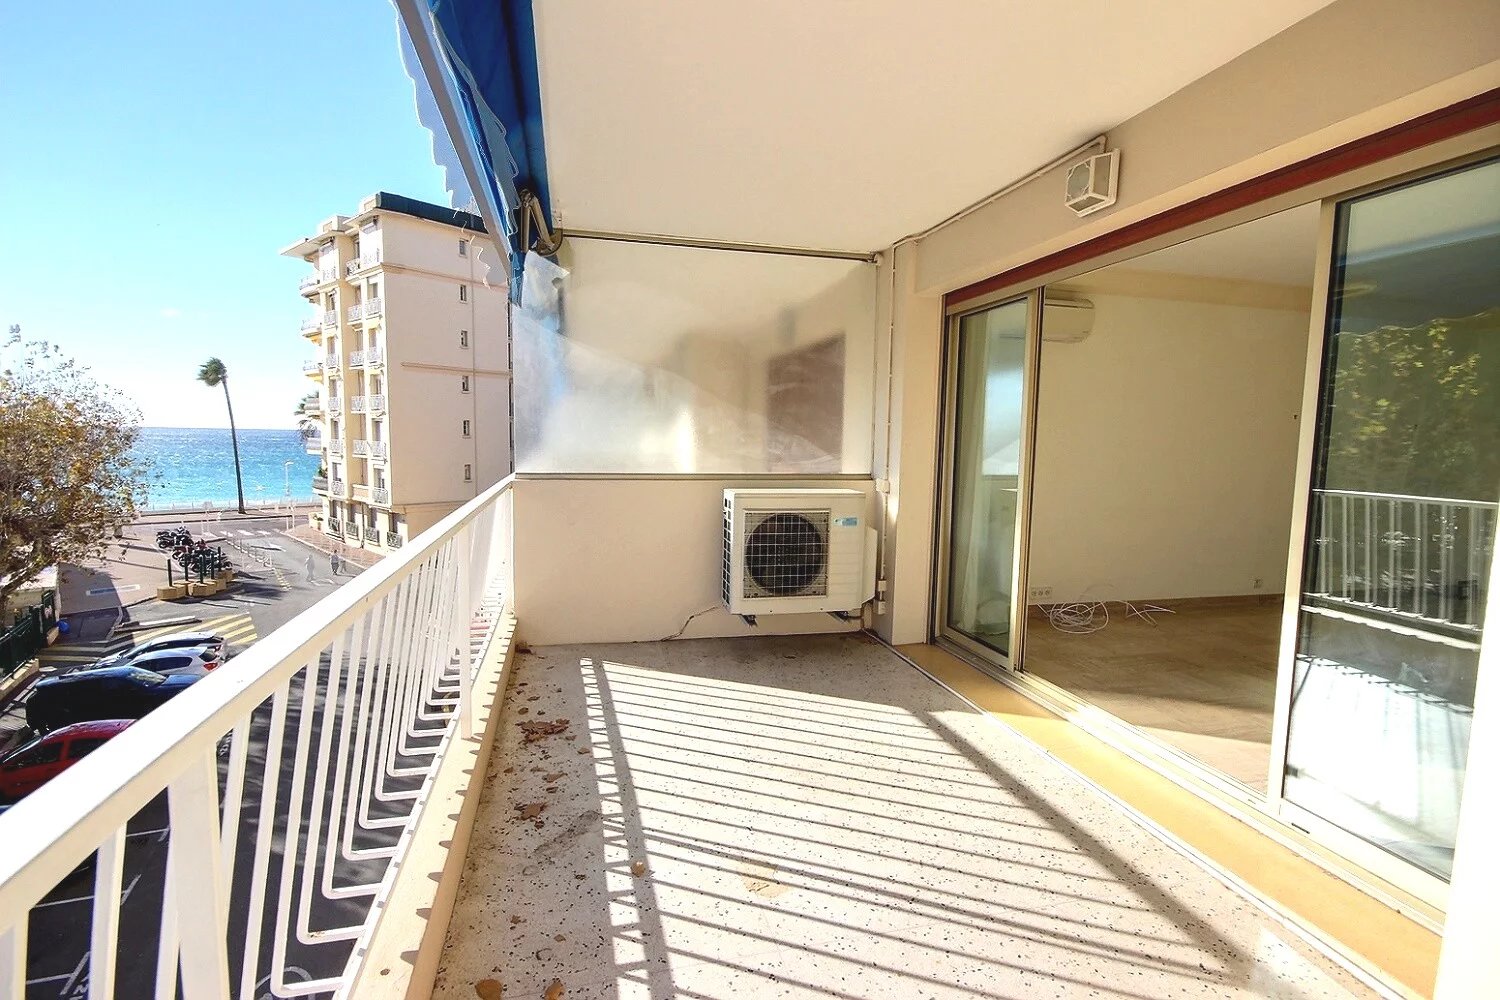 Real Estate Listing: Charming 3-Room Apartment for Sale in Cannes - Plages du Midi